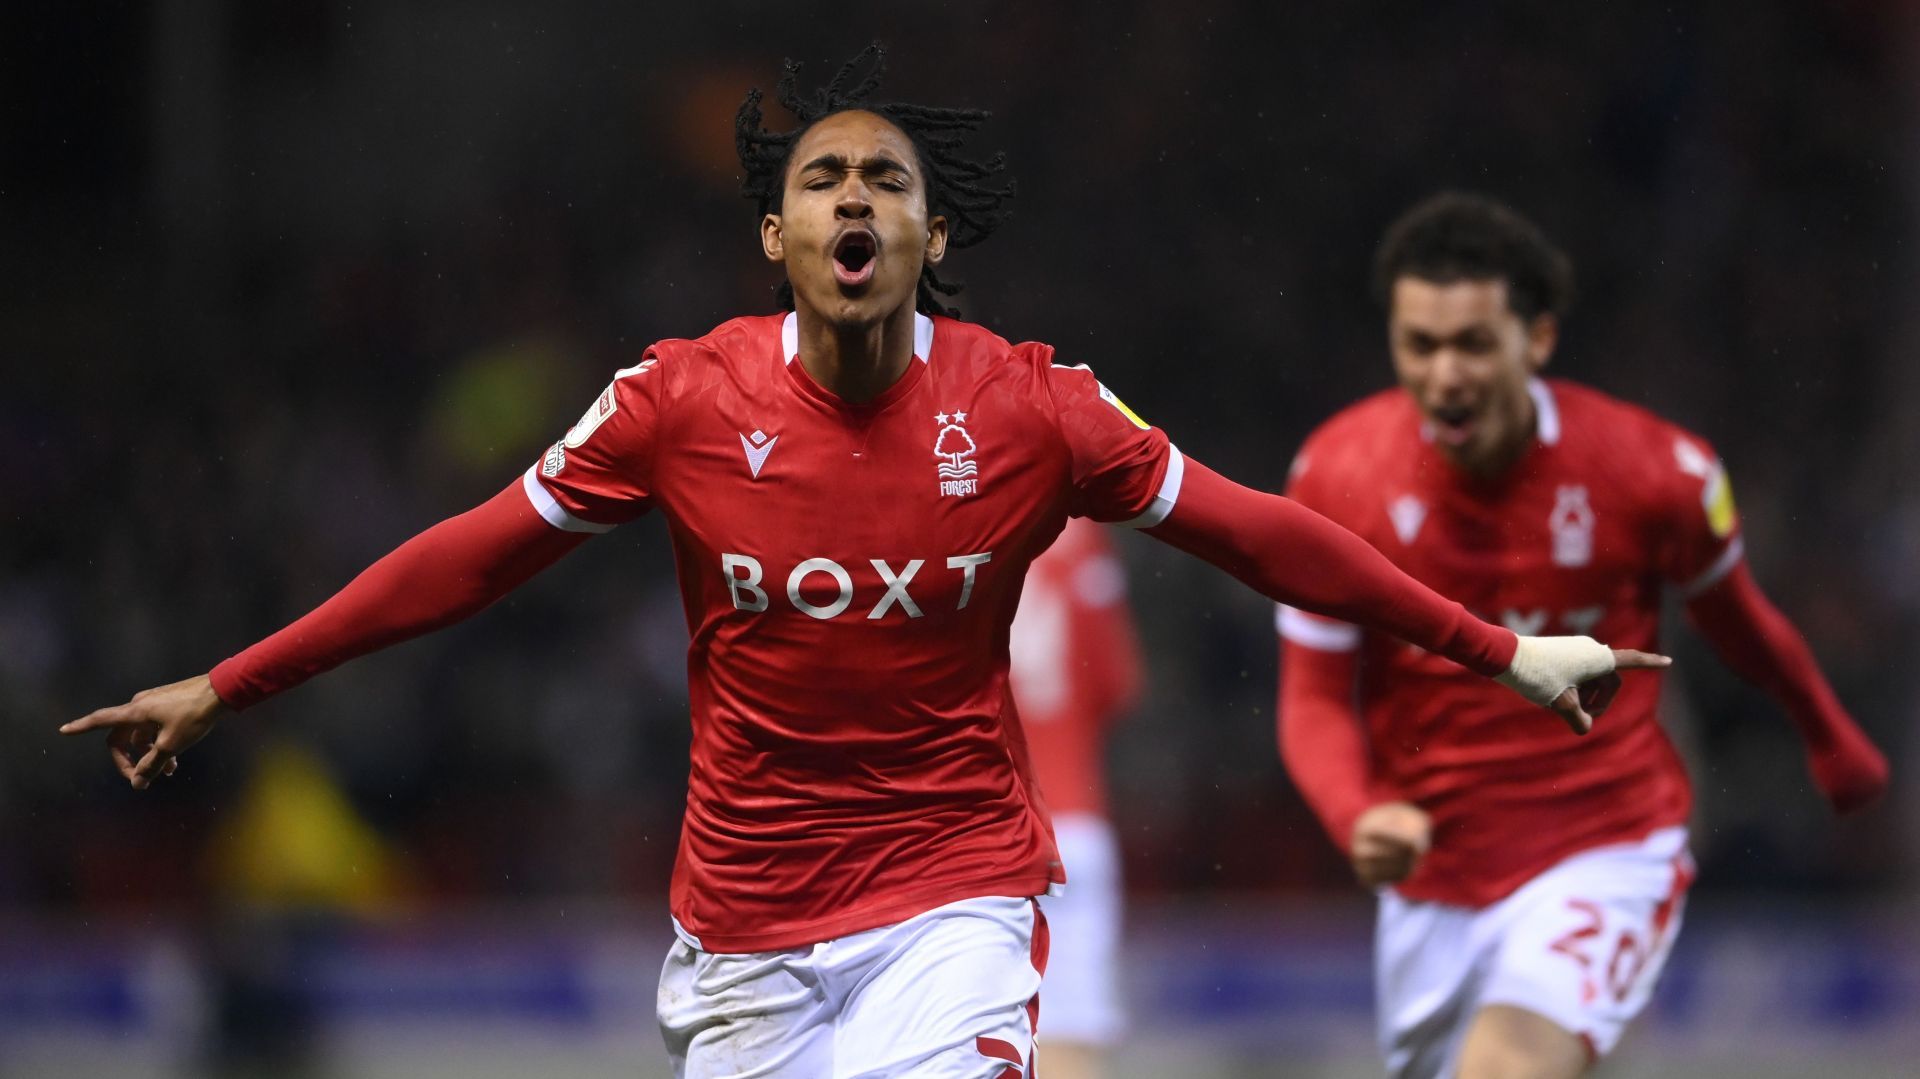 Djed Spence impressed during his loan spell at Nottingham Forest